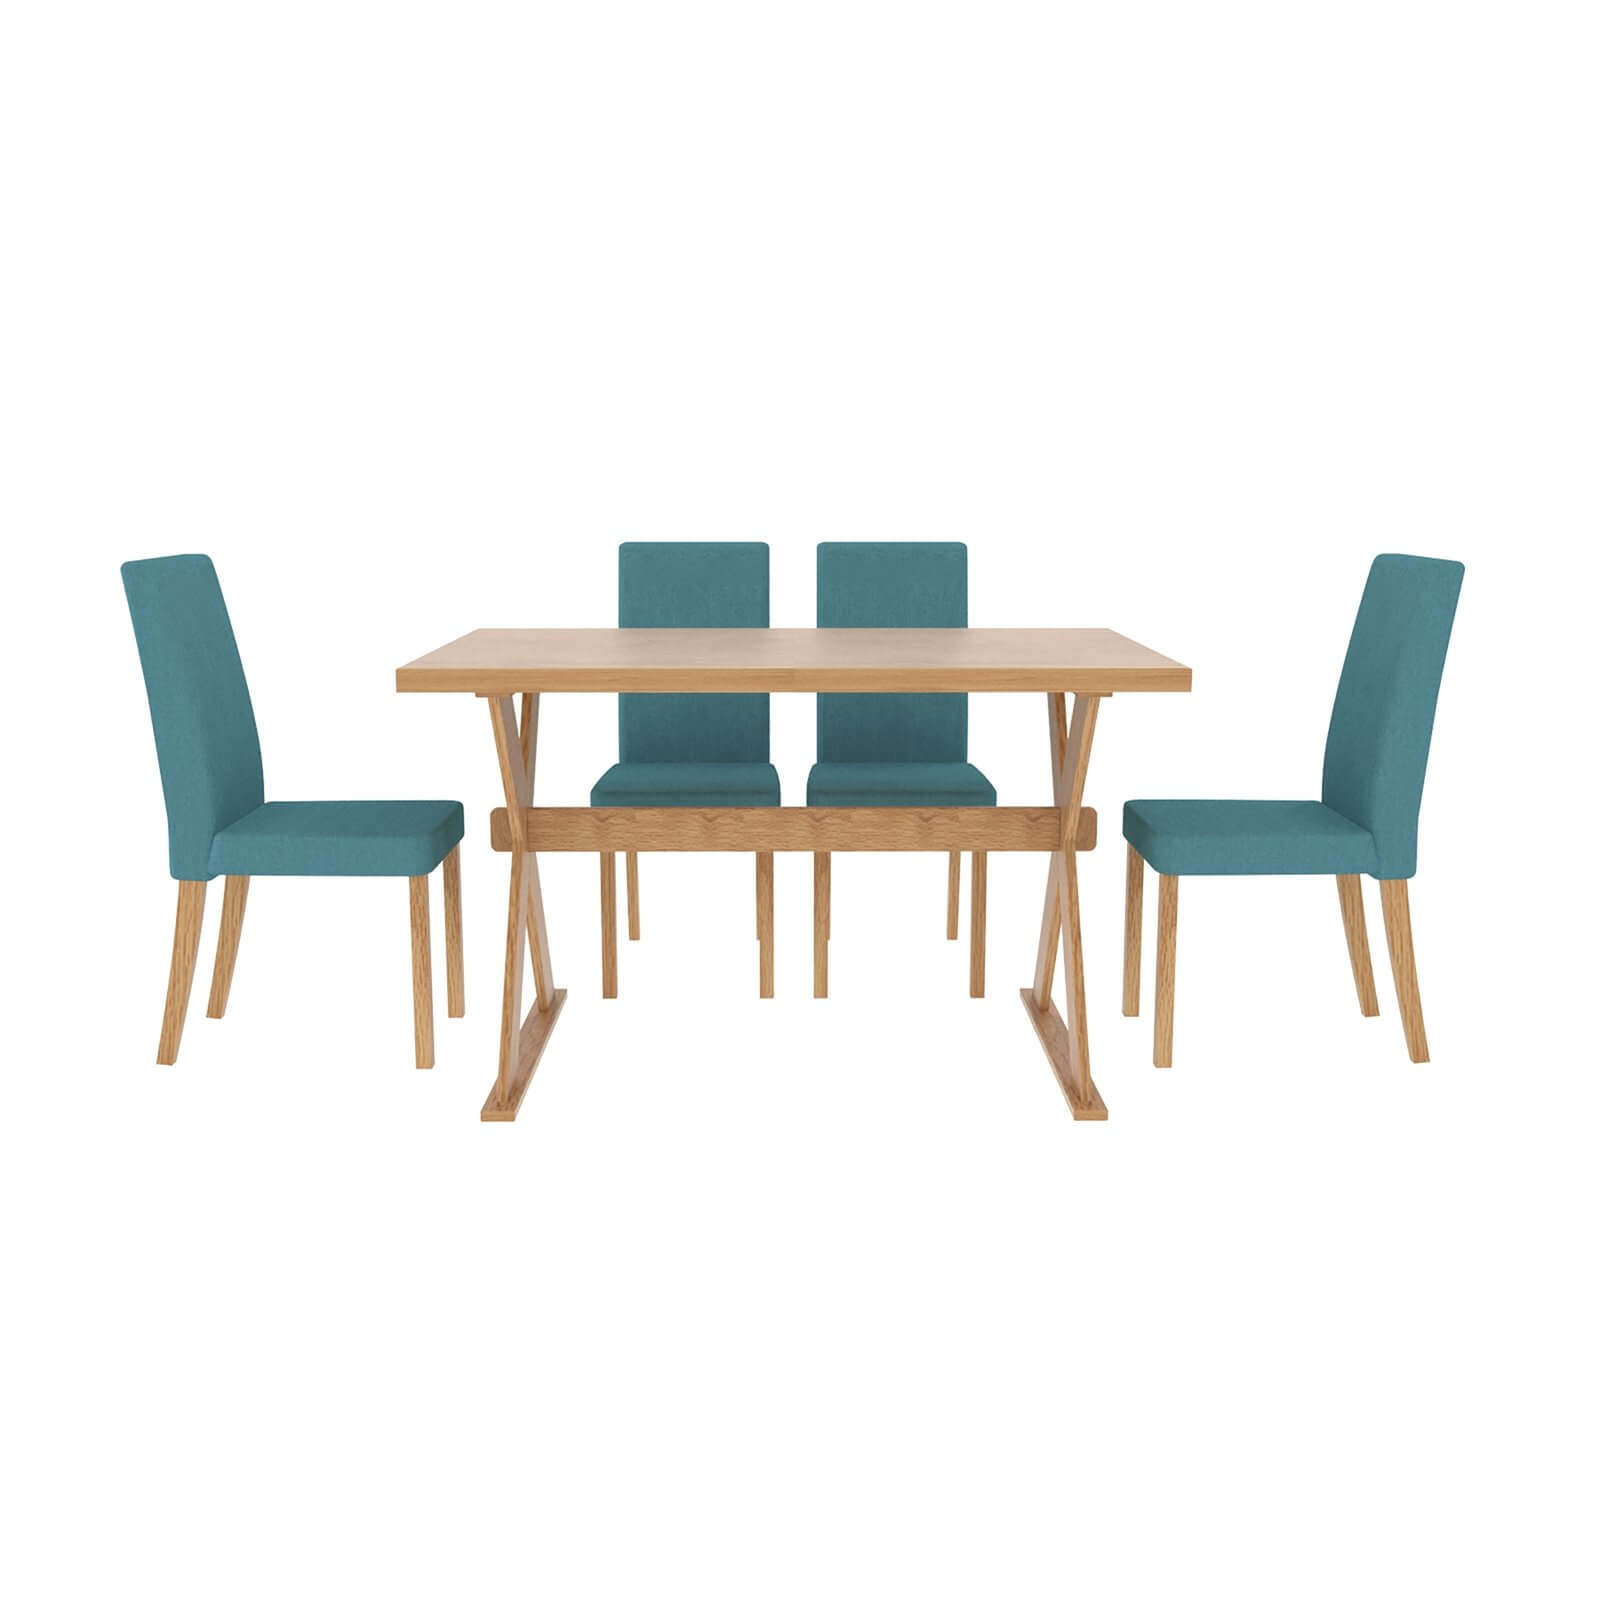 Seville 4 Seater Dining Set - Anna Dining Chairs - Teal